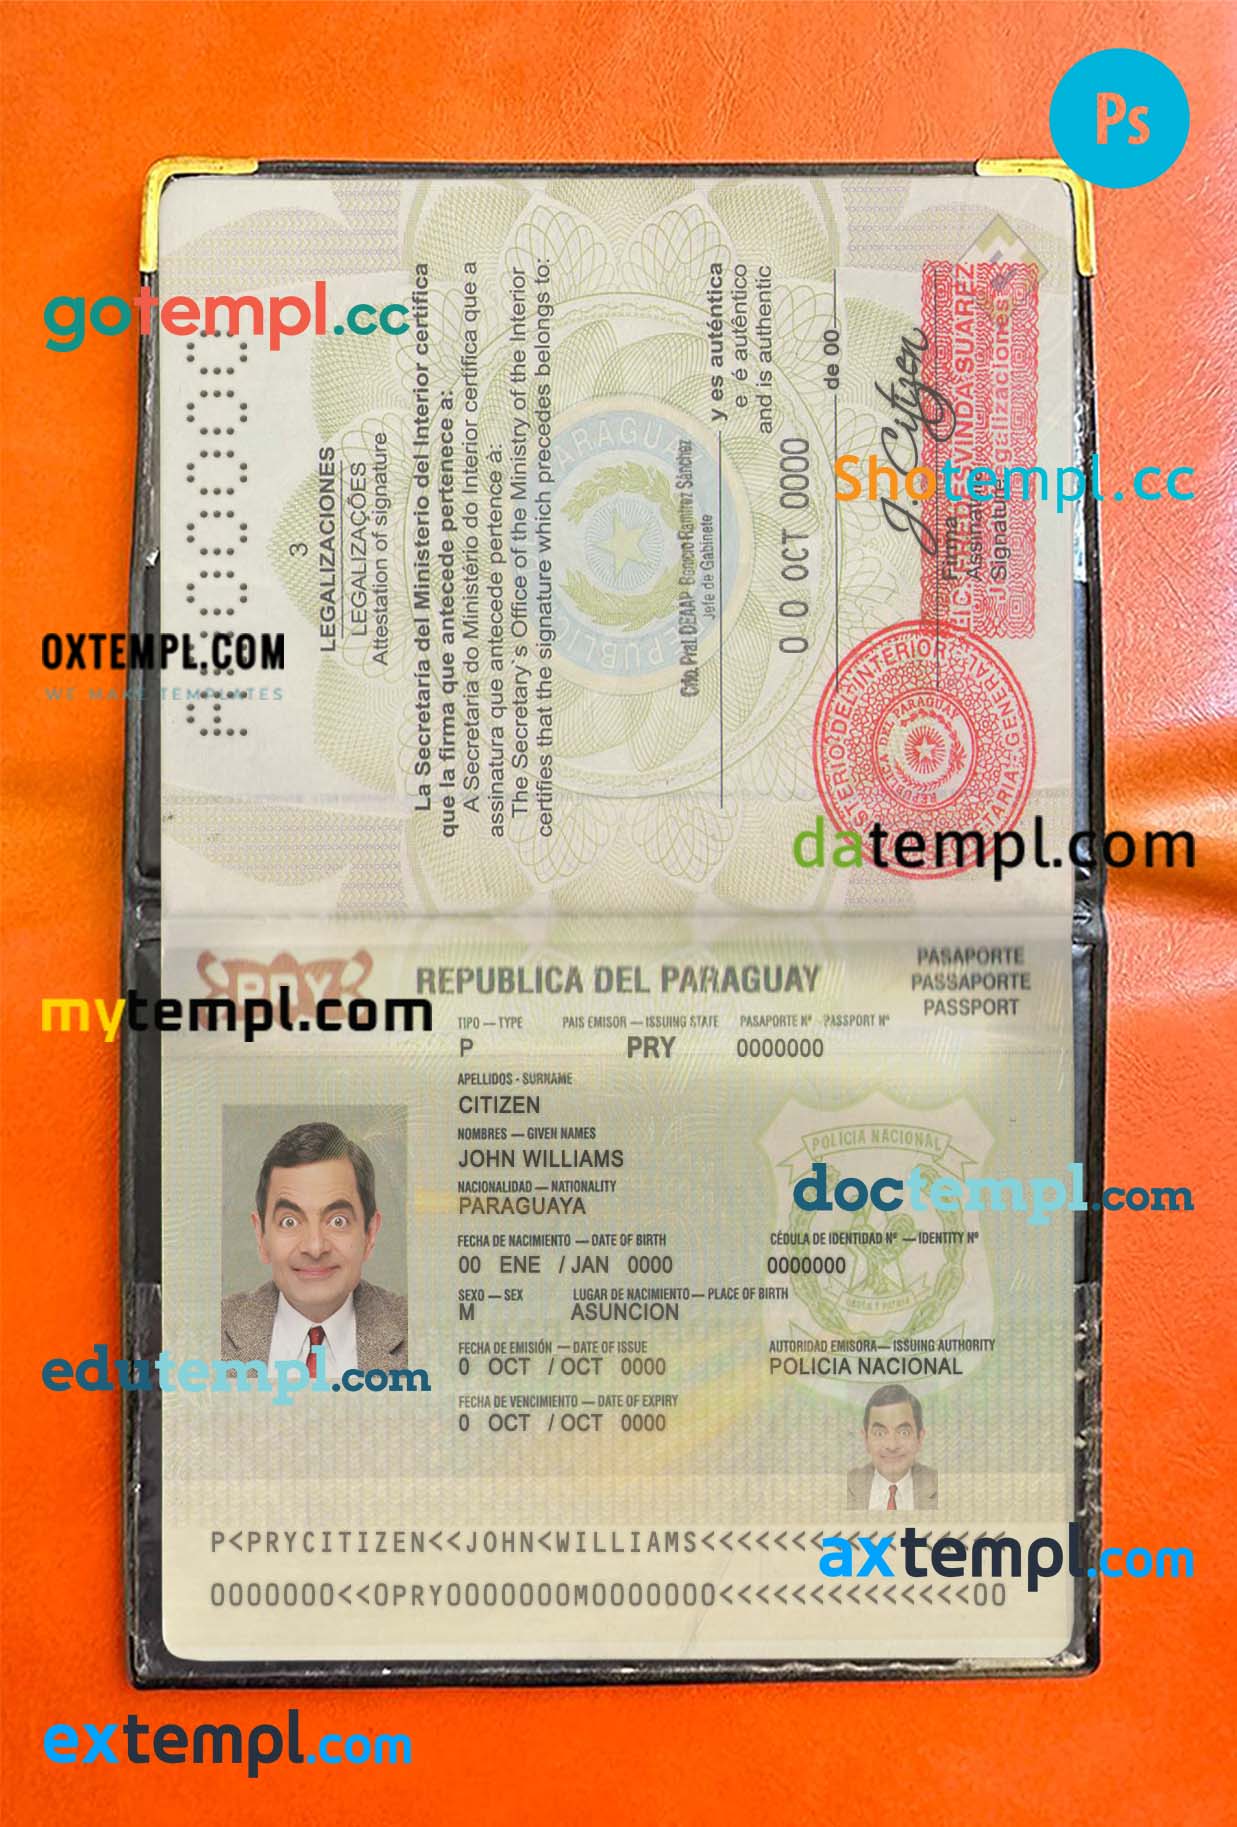 Bulgaria driving license PSD files, scan look and photographed image, 2 in 1 (2010-present)